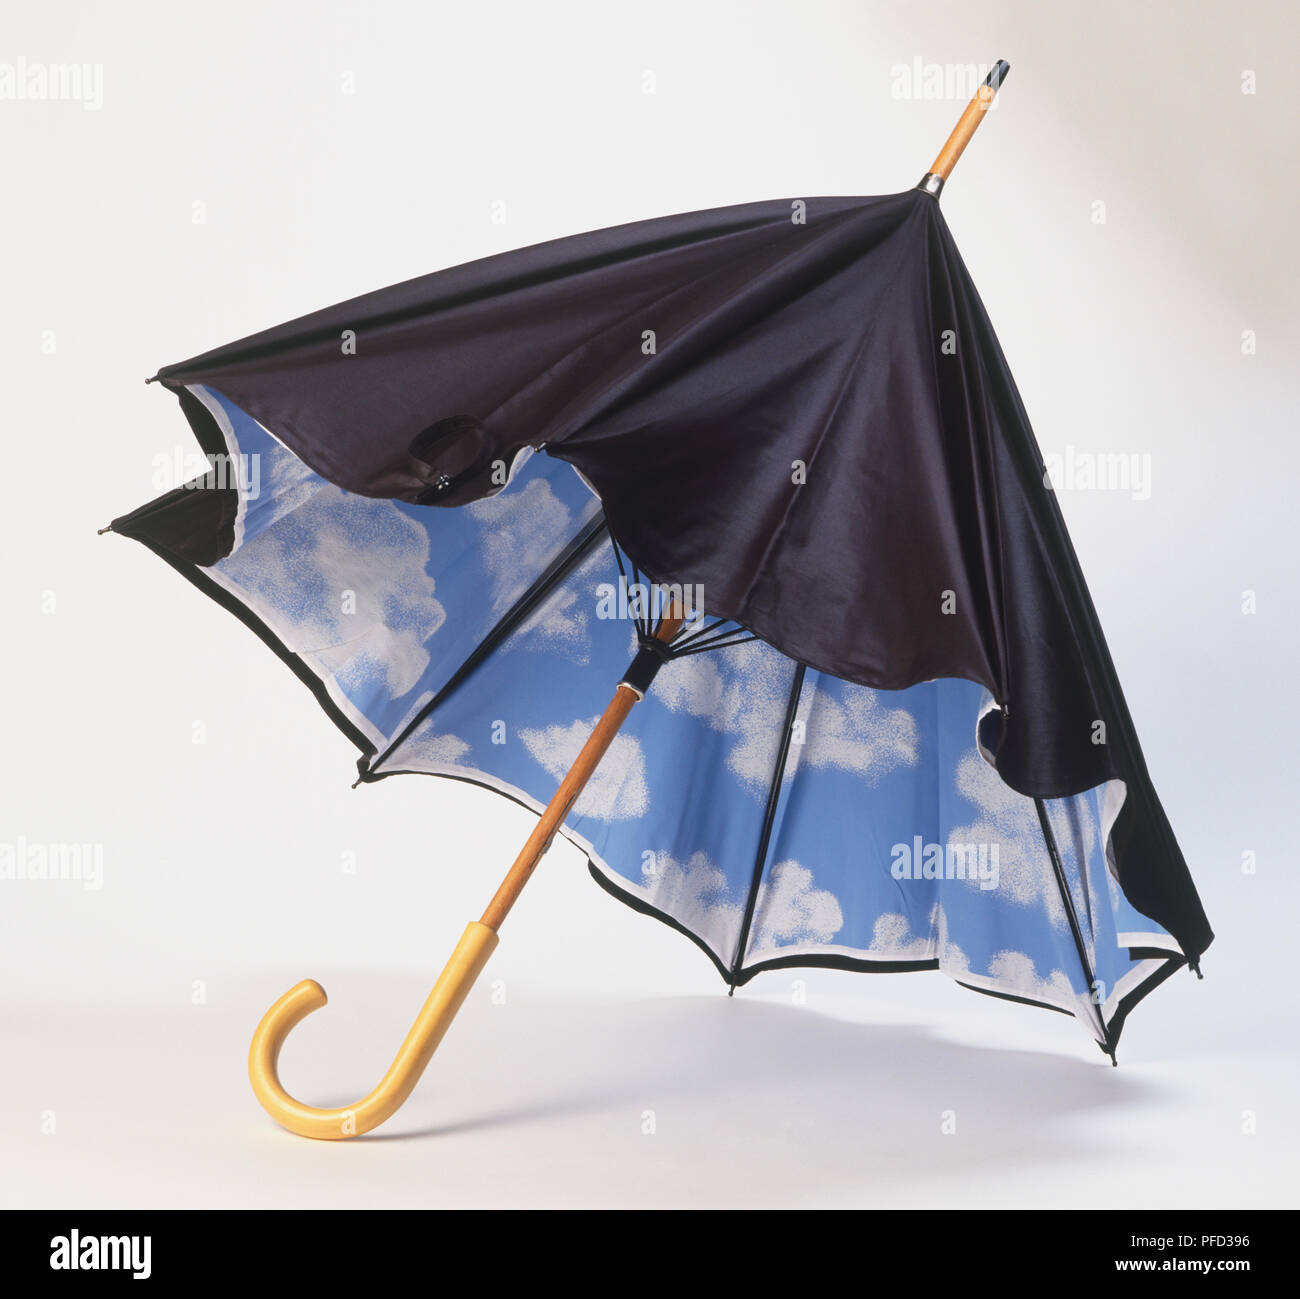 Waxed cotton umbrella with decorated interior showing white clouds on blue sky. Stock Photo